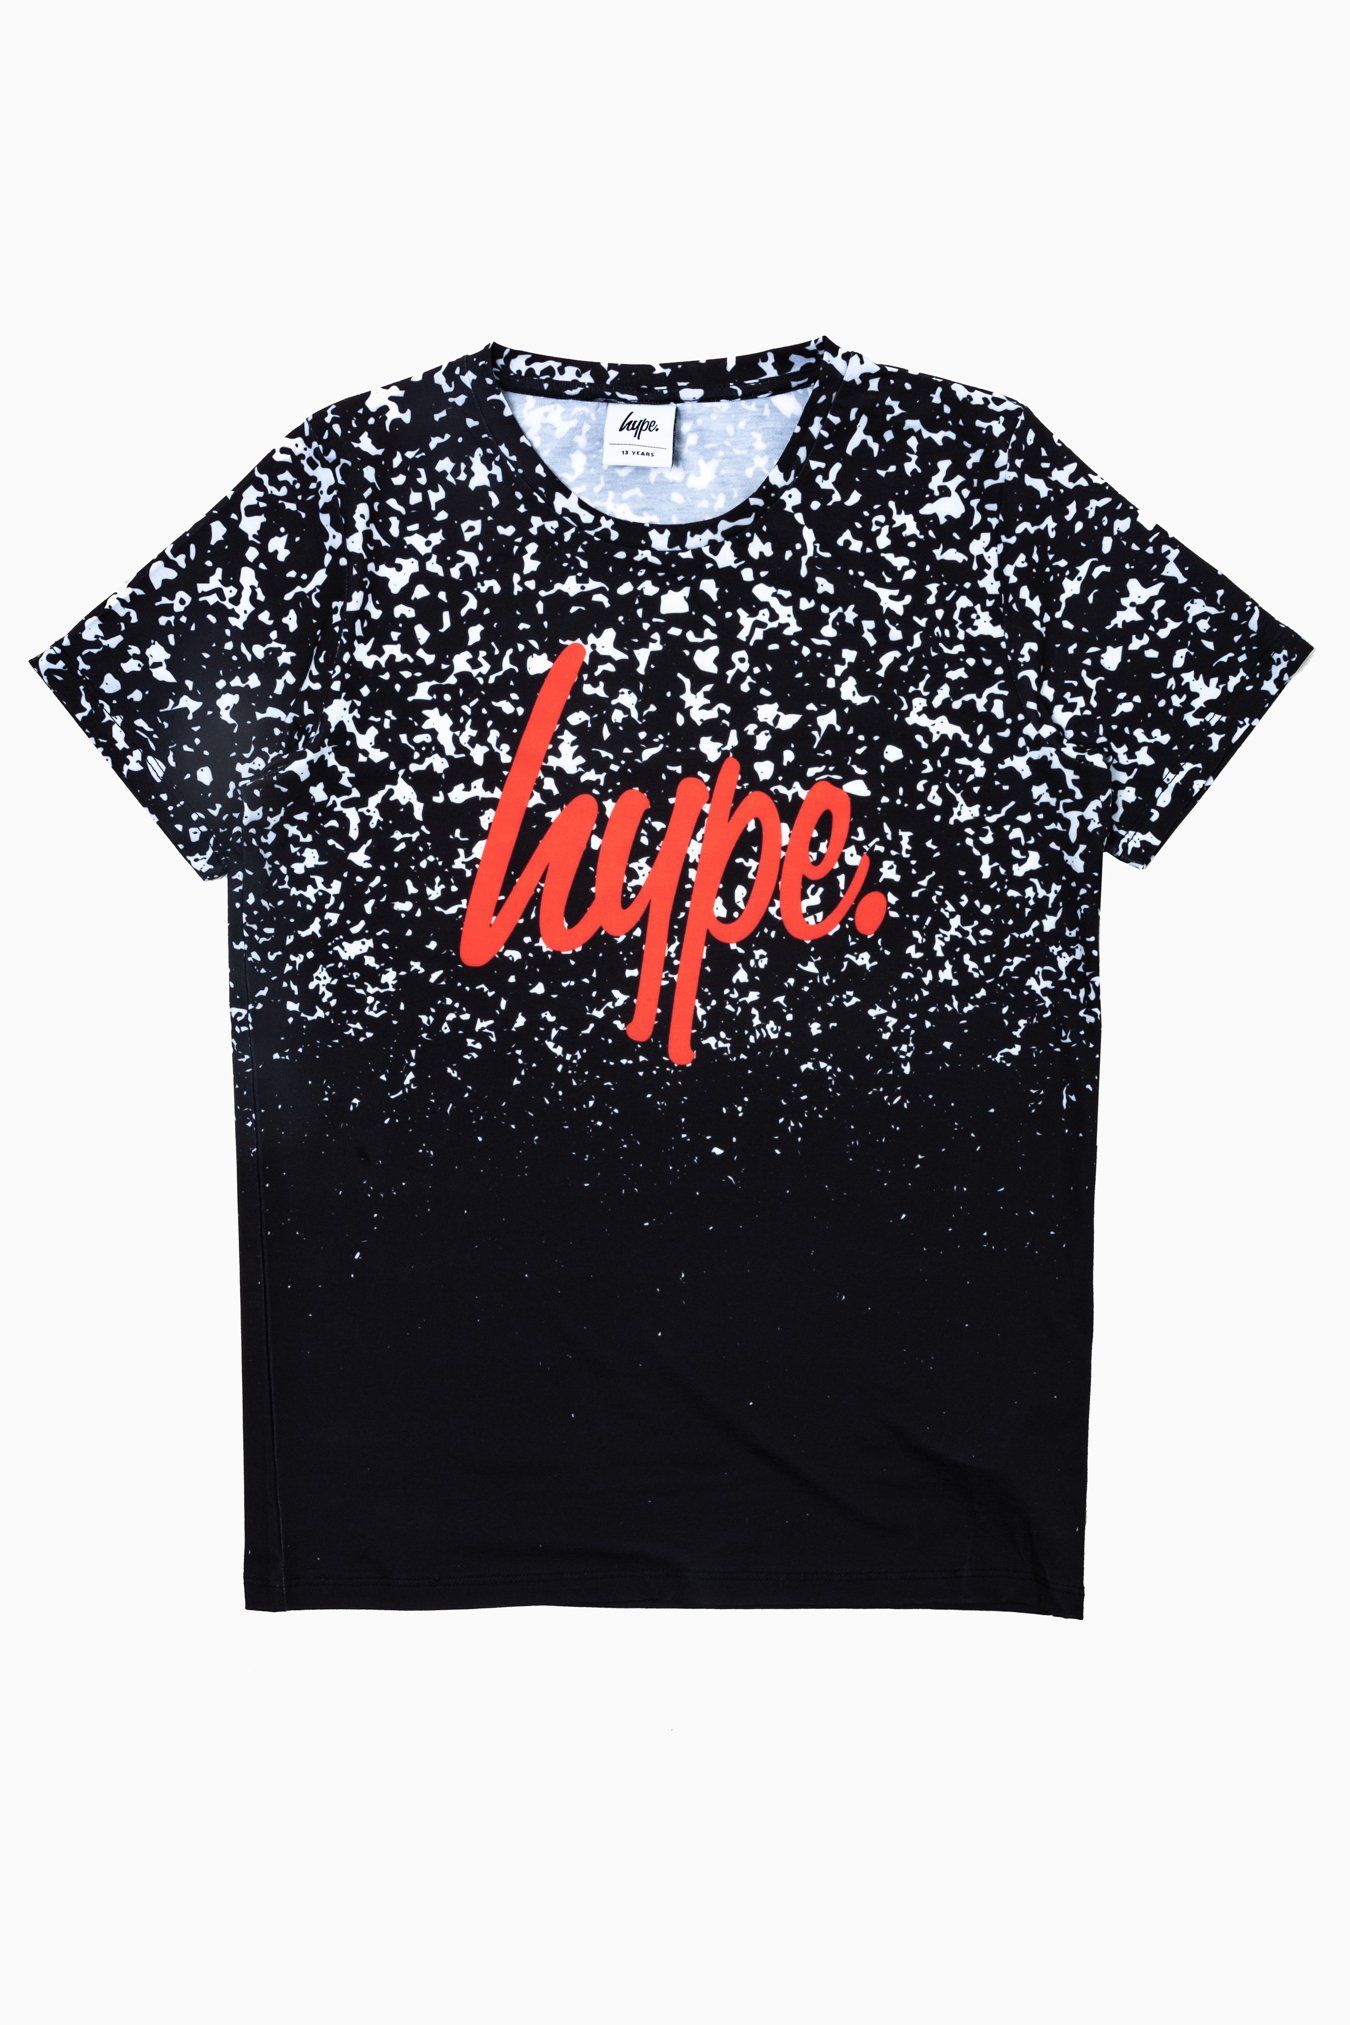 The HYPE. speckle fade kids t-shirt features a monochrome colour palette with a red injection. Featuring a crew neck line, short sleeves and the iconic HYPE. script logo across the front in a contrasting red in our iconic fade with a speckle overlay print. For a casual look, wear with a pair of sweat joggers, or if you're after a smarter look, a pair of skinny fit denim jeans and box fresh kicks. Machine wash at 30 degrees.